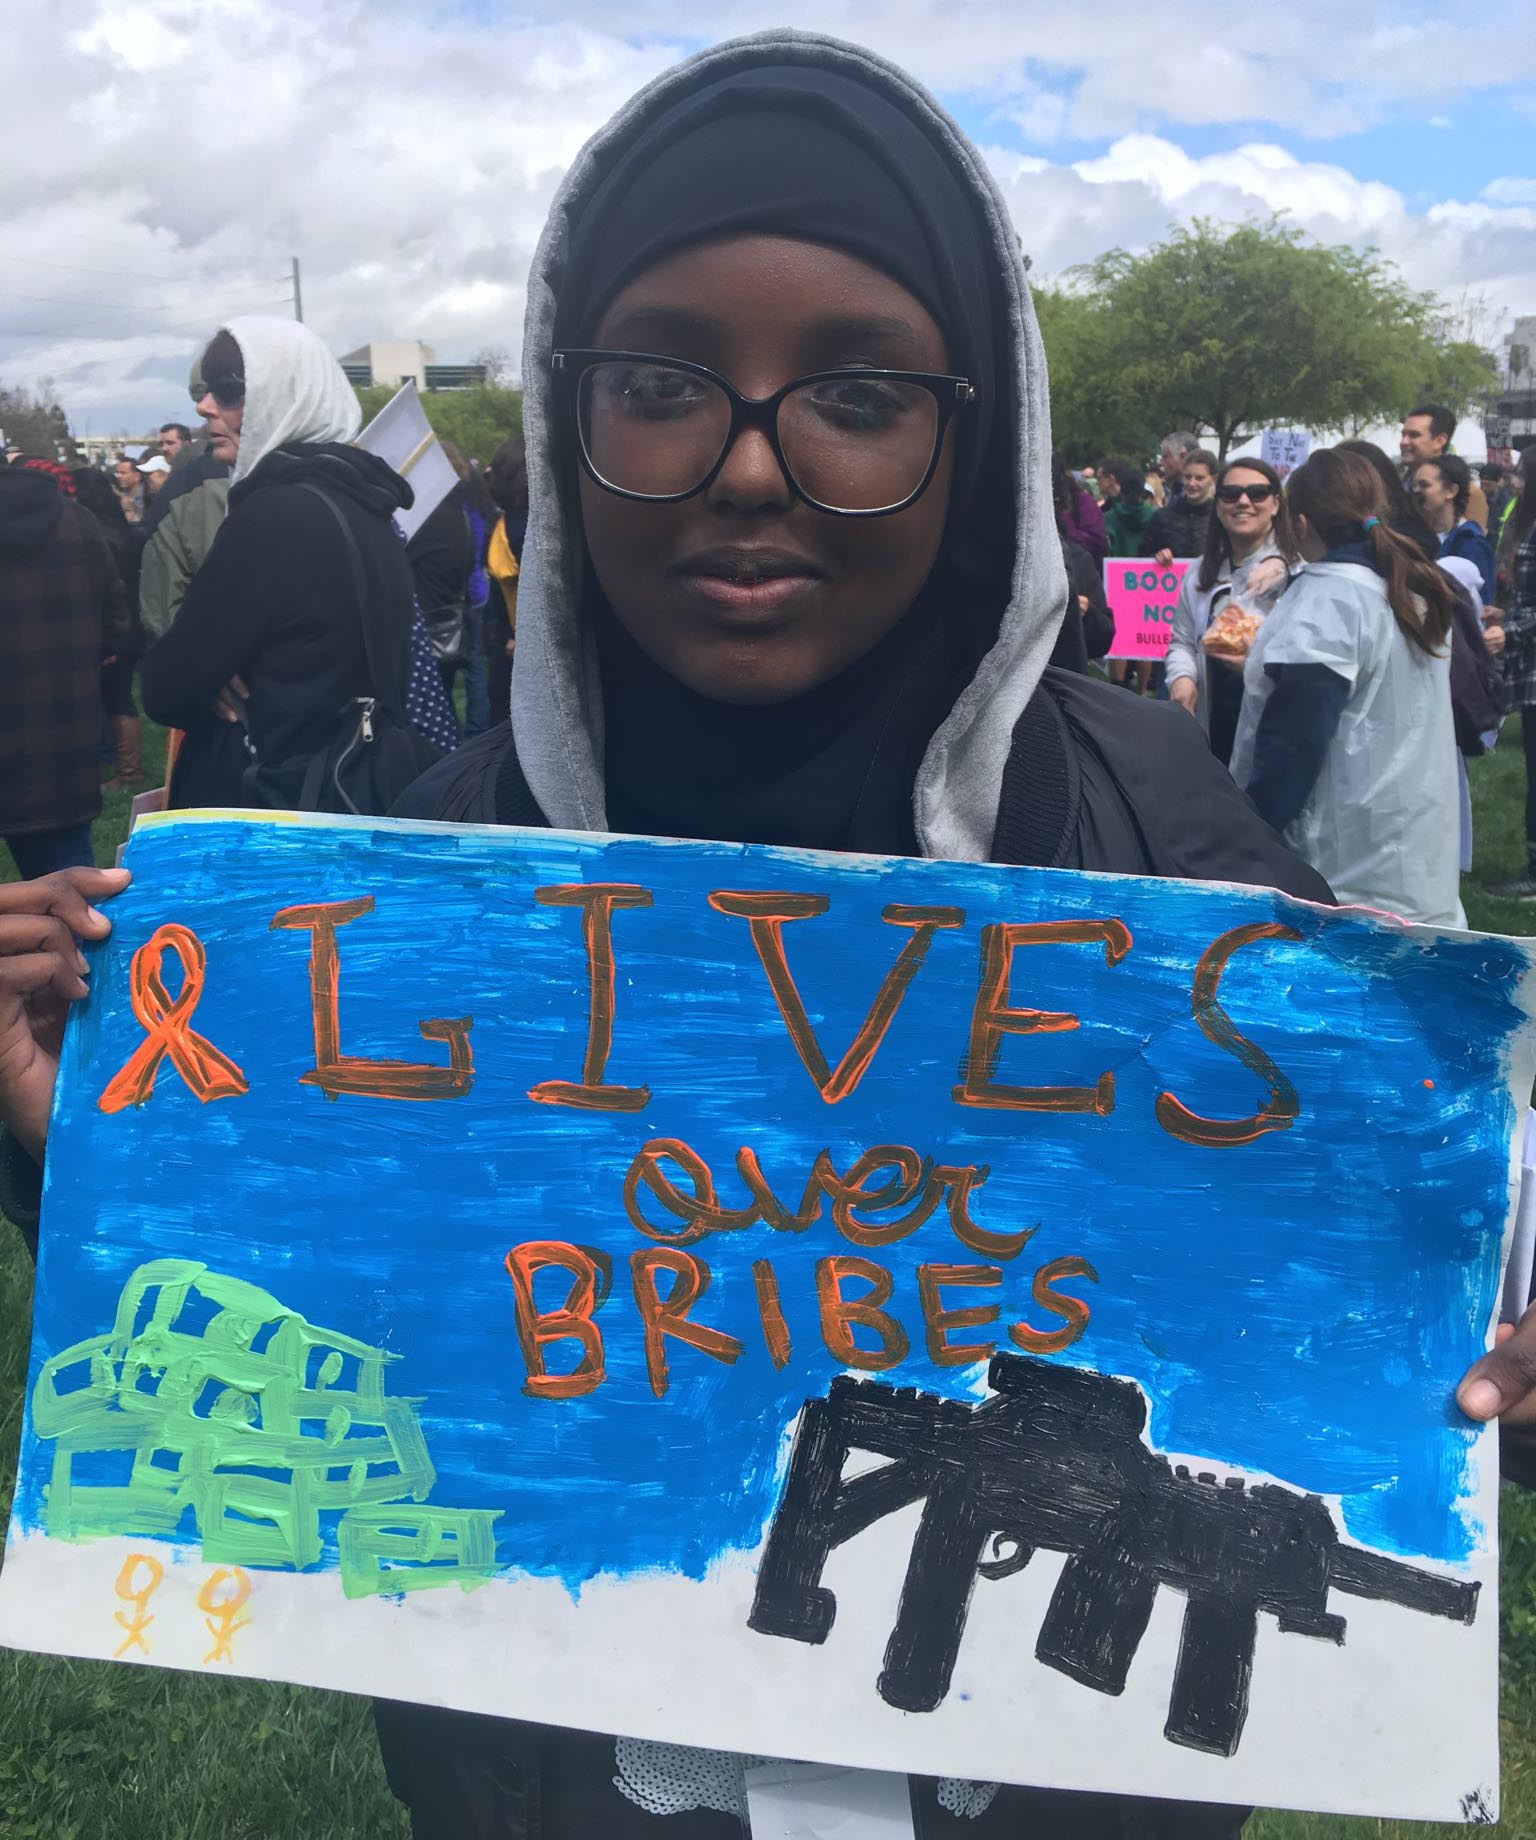 Asmara Farrah is a 7th grader at Grenada Islamic School in Santa Clara, CA and was one of the youngest speakers at the San Jose march.